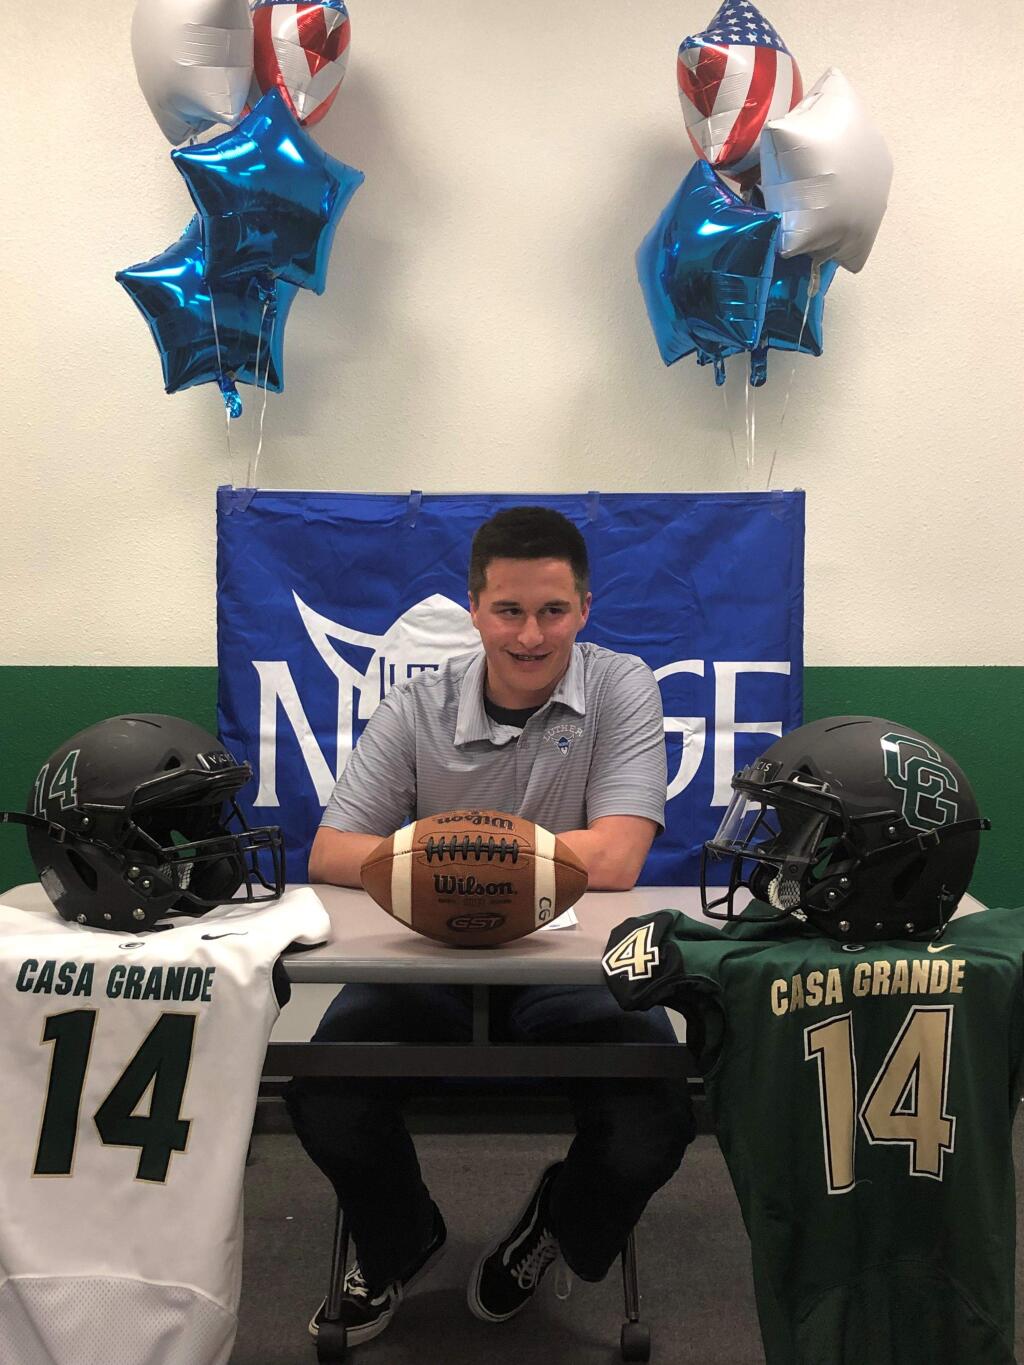 SUBMITTED PHOTOCasa Grande High School senior Aaron Krupinsky has signed a Letter of Intent to play football at Luther College in Iowa.